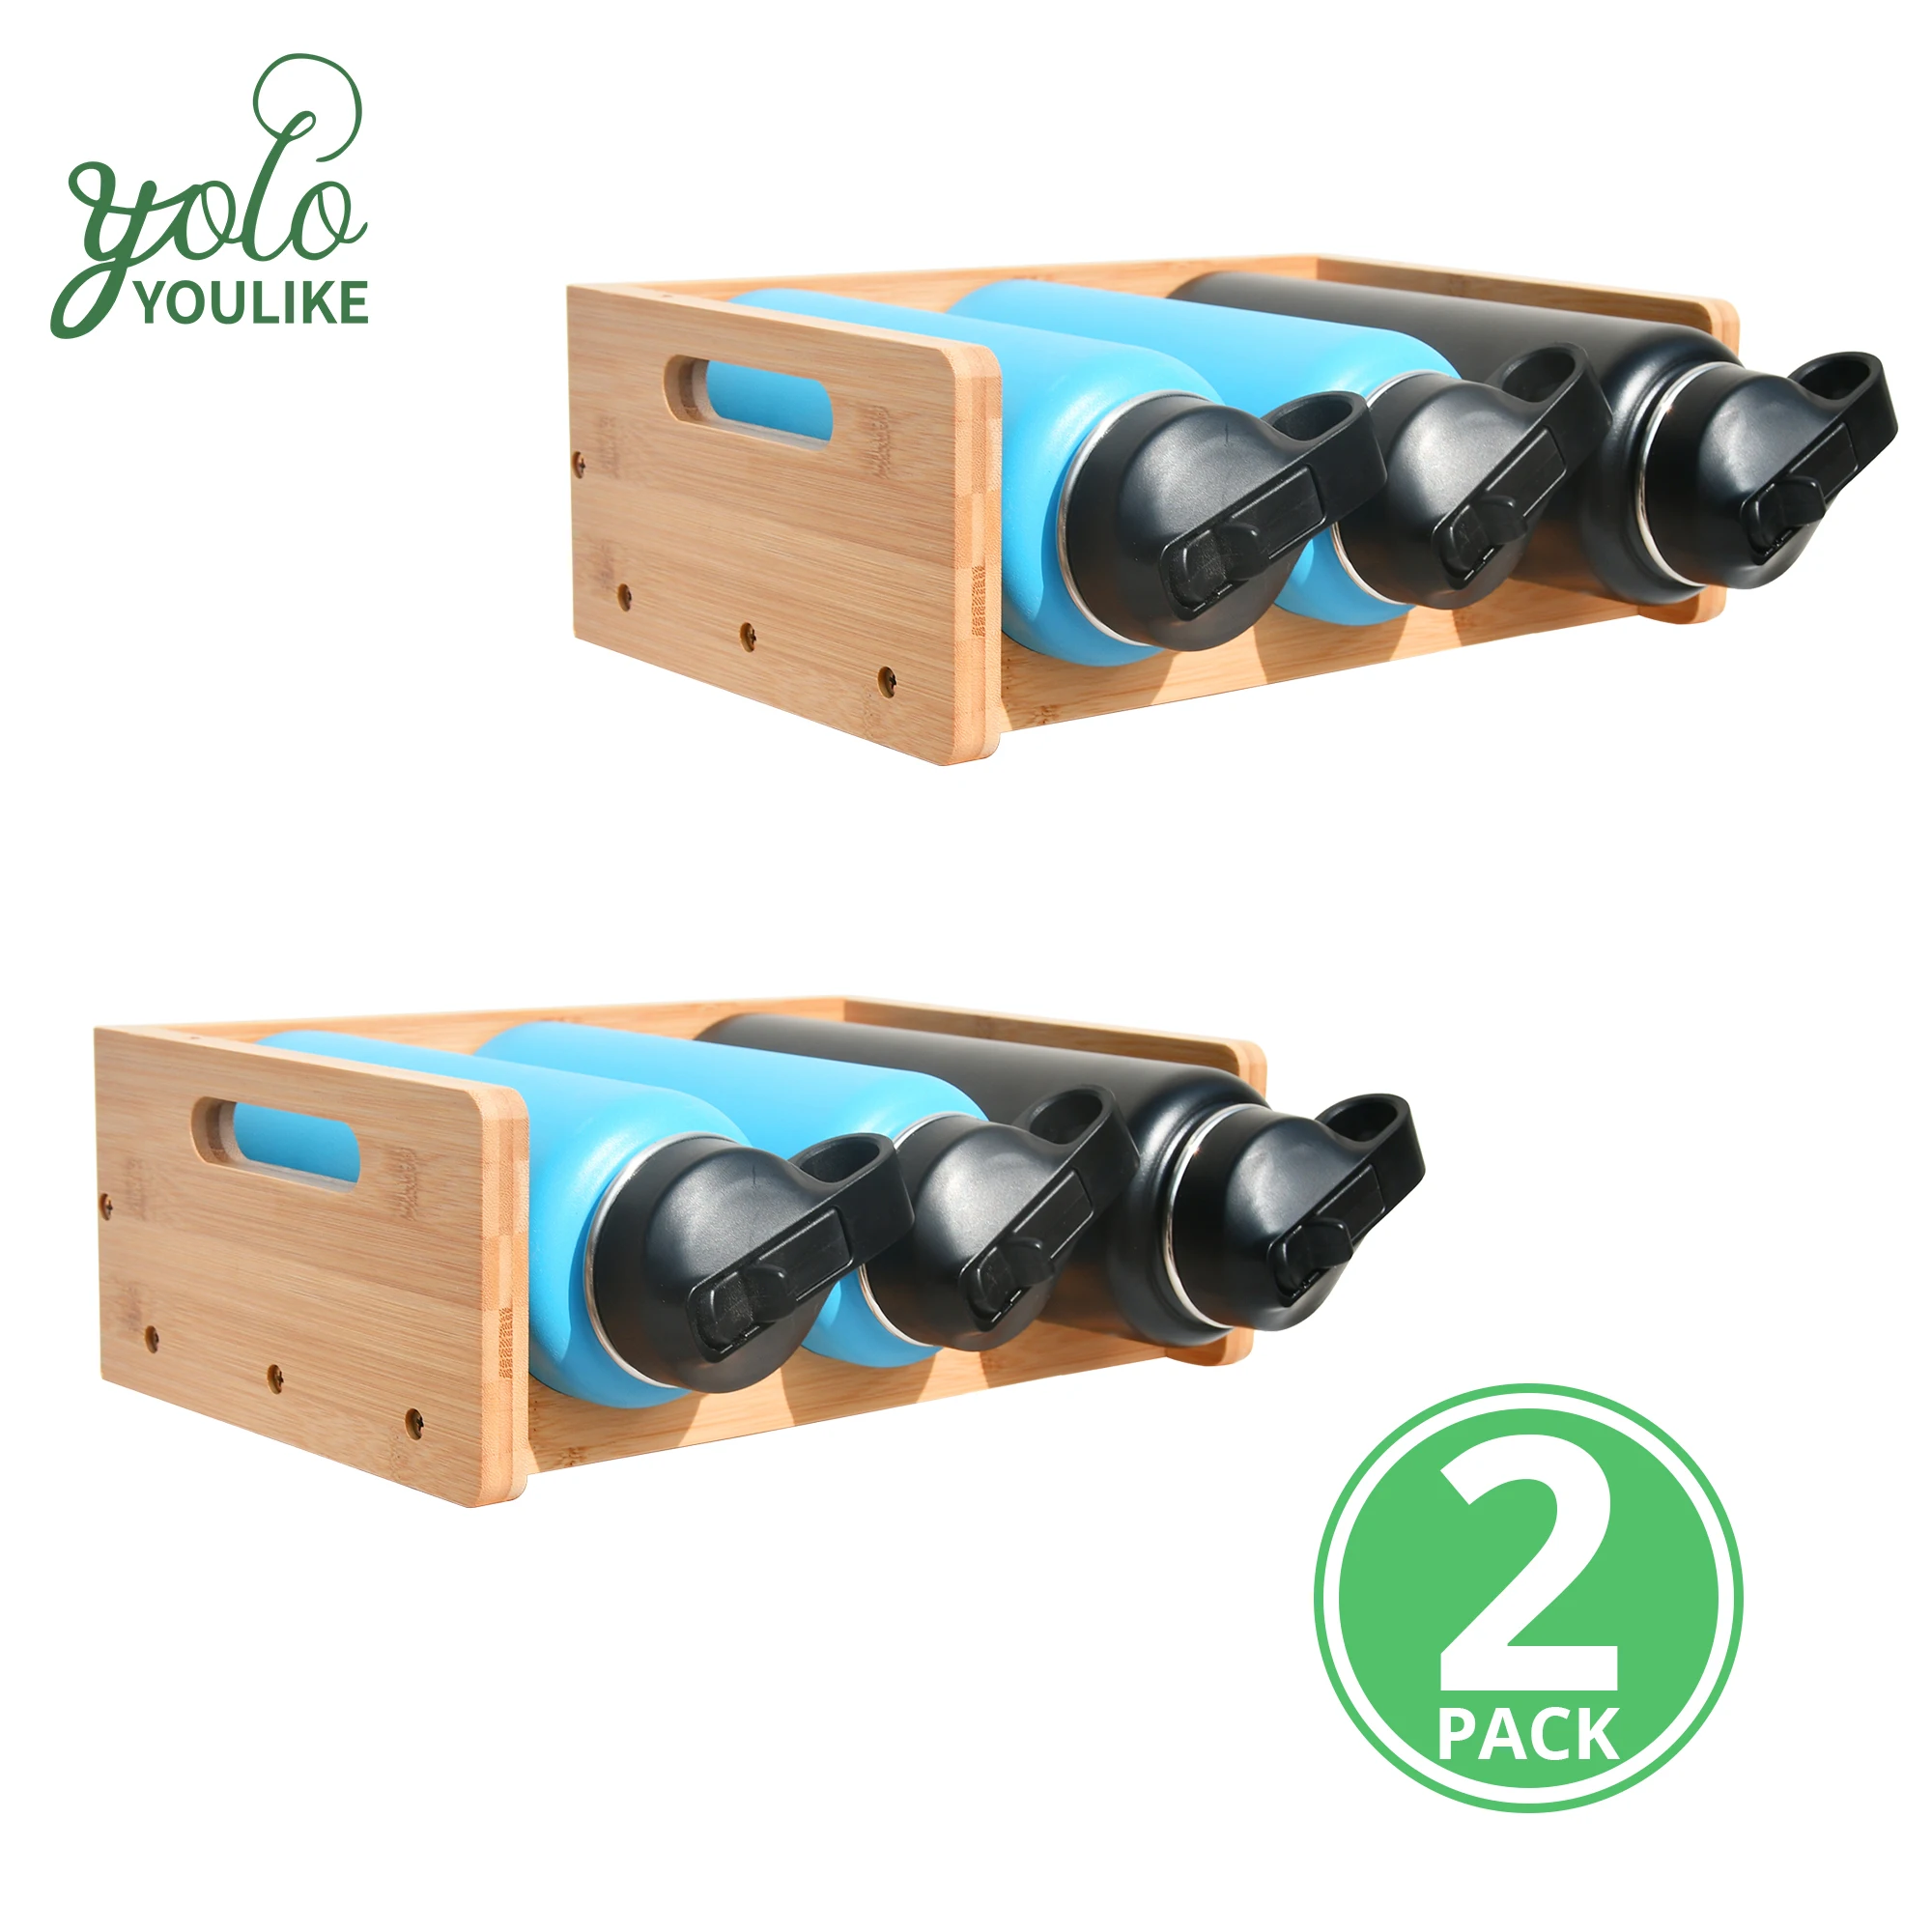 Wholesale 2 Pack 3-Slot Kitchen Pantry Home Cup 6 Rack Hold Bamboo Water Bottle Organizer for Cabinet